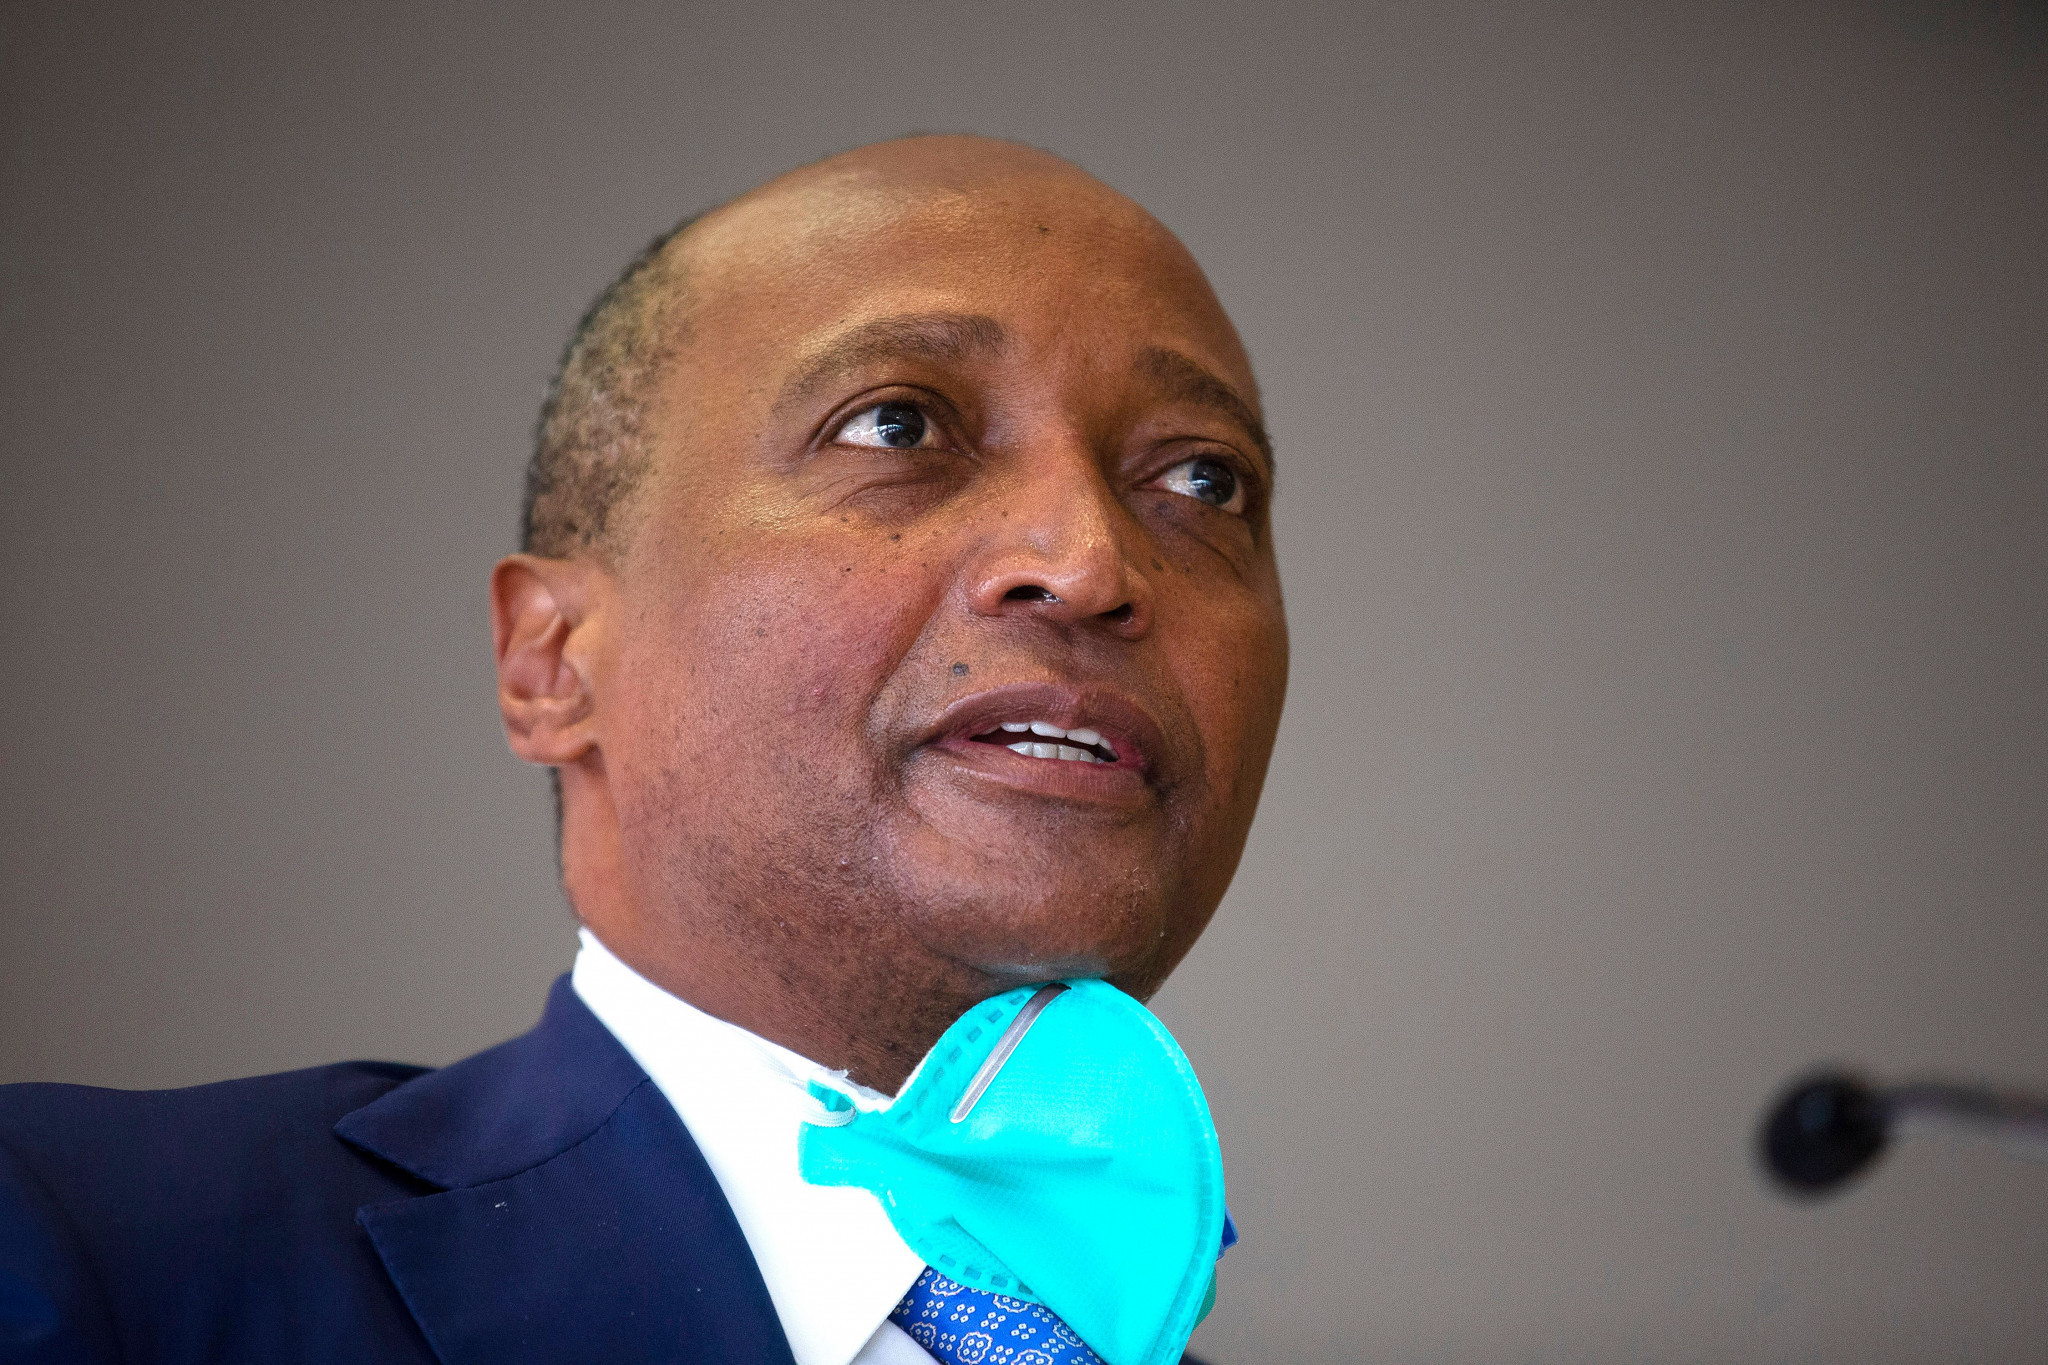 CAF President Patrice Motsepe has said a closed gate caused the crushing incident last night ©Getty Images